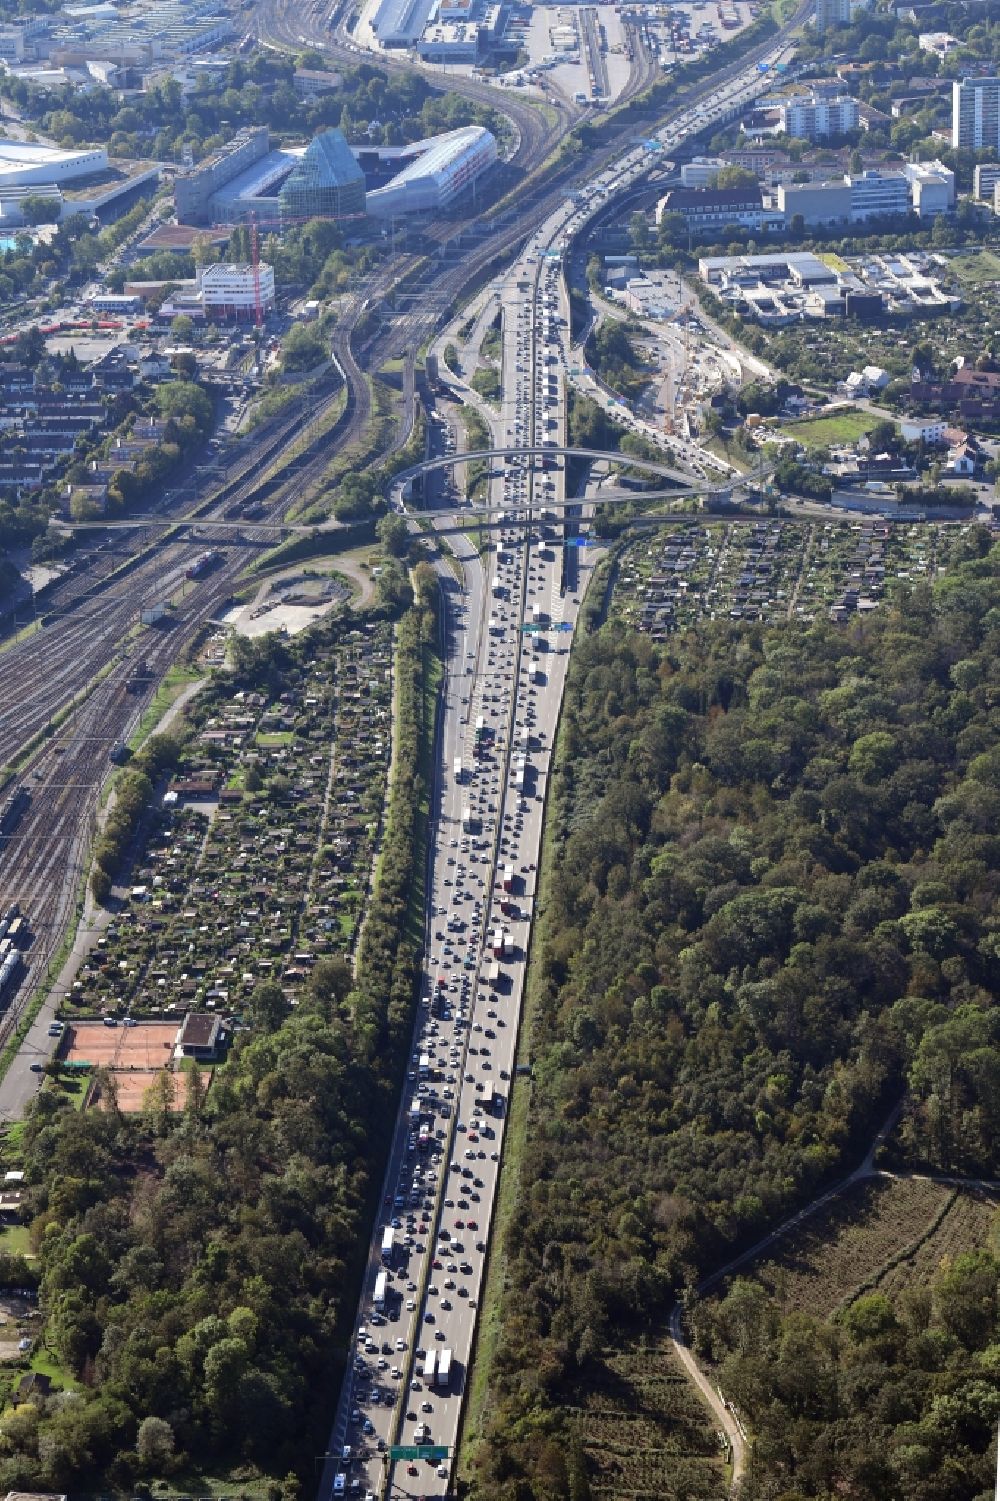 Aerial photograph Muttenz - Highway congestion along the route of the lanes of the swiss motorway A2 / A3Autobahn in Muttenz in the canton Basel-Landschaft, Switzerland